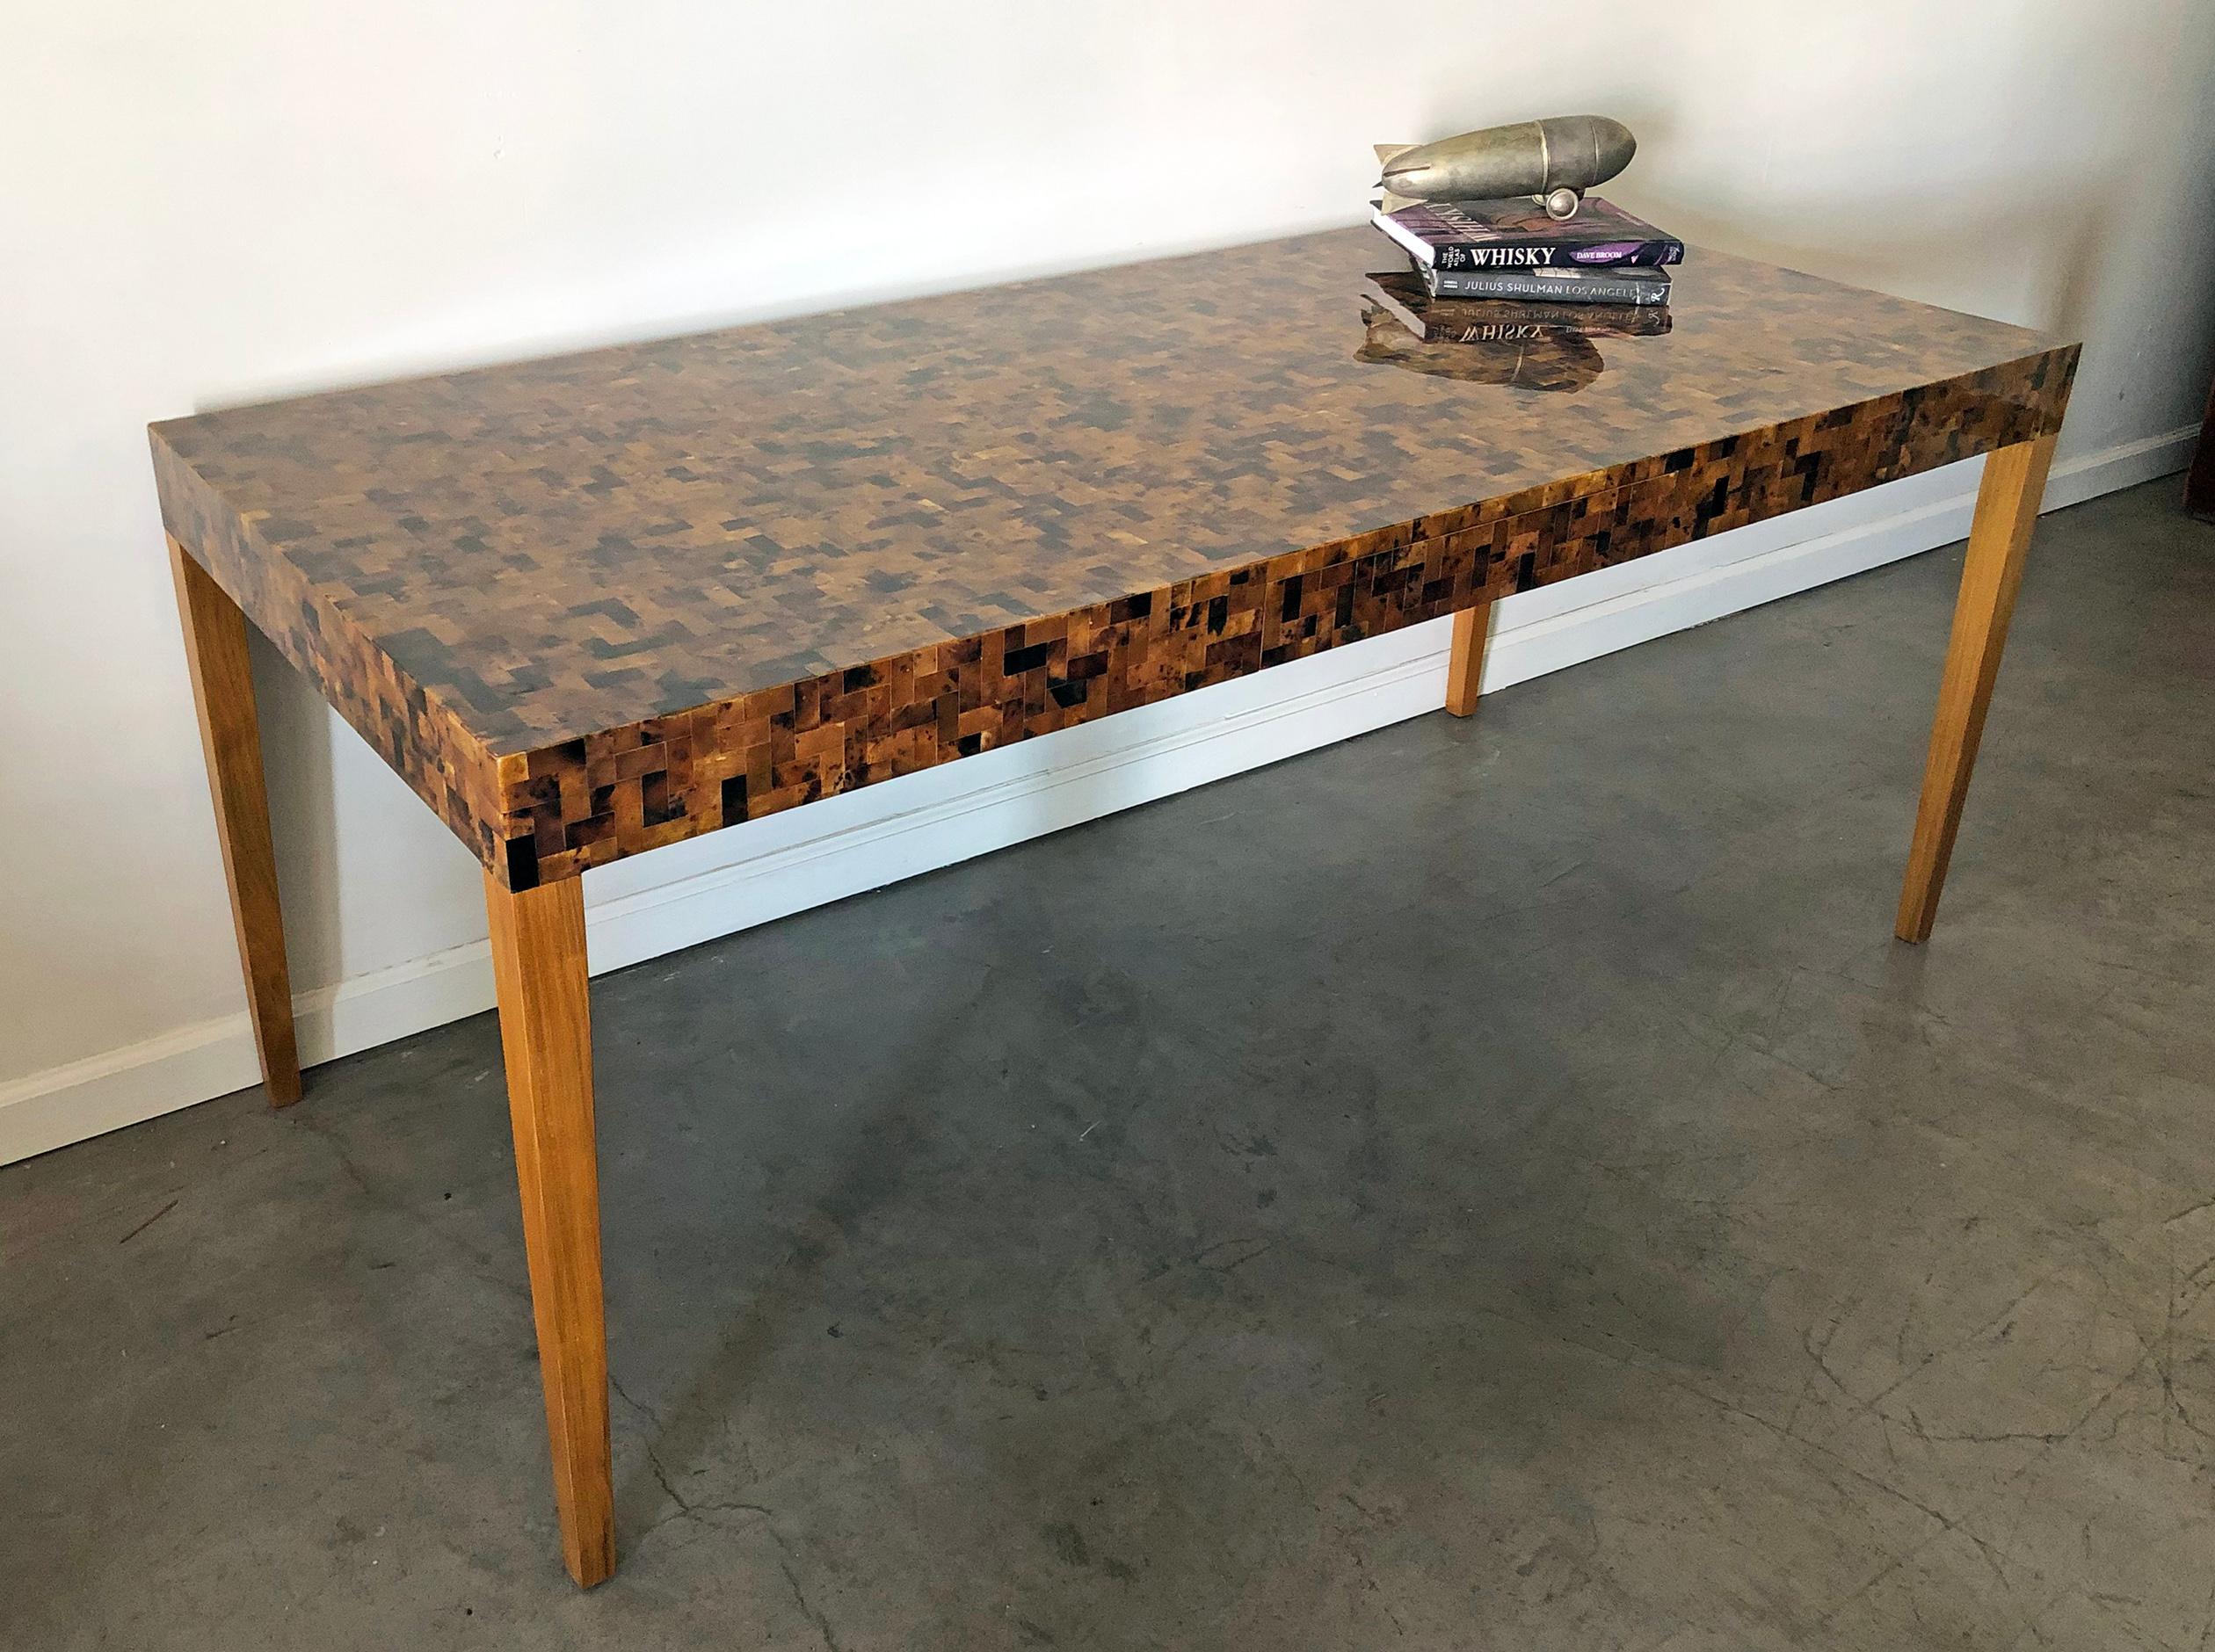 Another stunning design by Carlo Furniture, this Yellow Sea penshell dining table is just as beautiful as it is functional. With a top completely clad in penshell (which has a similar effect and properties of tortoise shell) this clean, simple